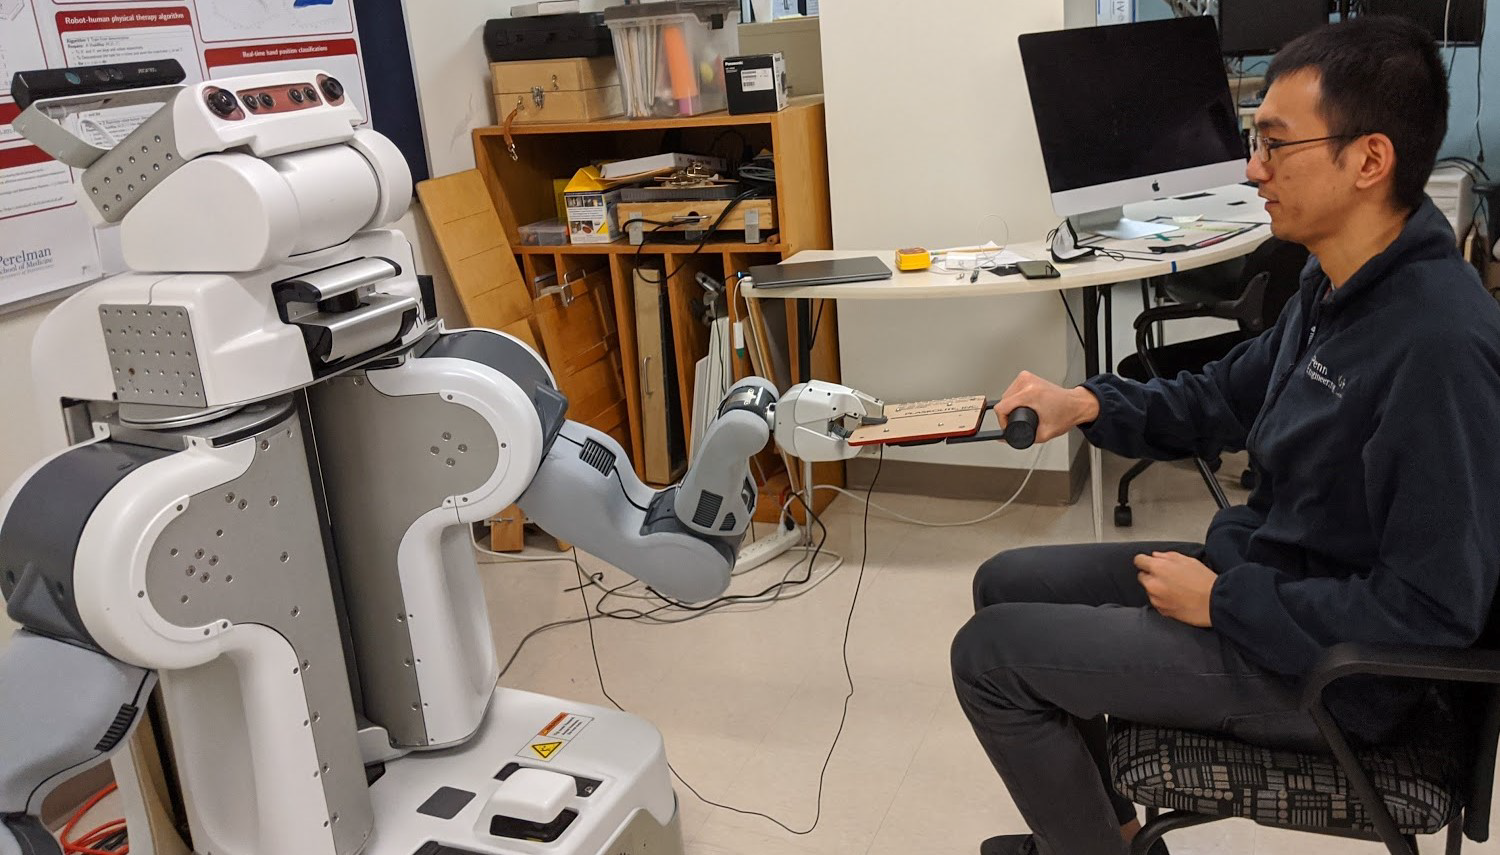 Robotics for Occupational Therapy: Learning Upper-Limb Exercises From Demonstrations | Haptic Intelligence Max Planck for Intelligent Systems